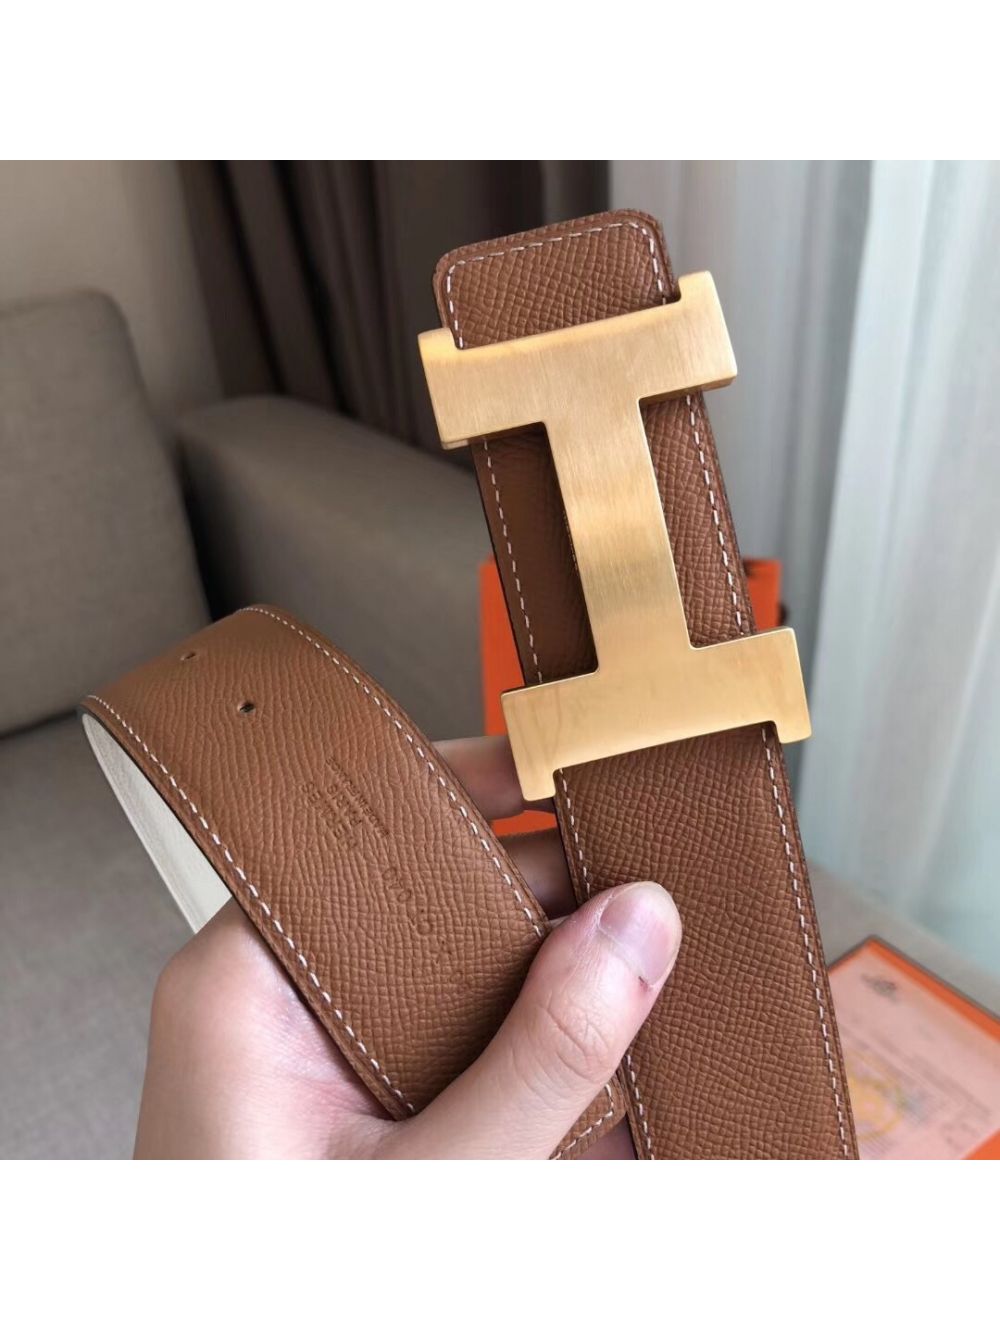 Hermes Kelly 18 Belt Gold/Golden Brown Epsom leather with Rose Gold-plated  buckle